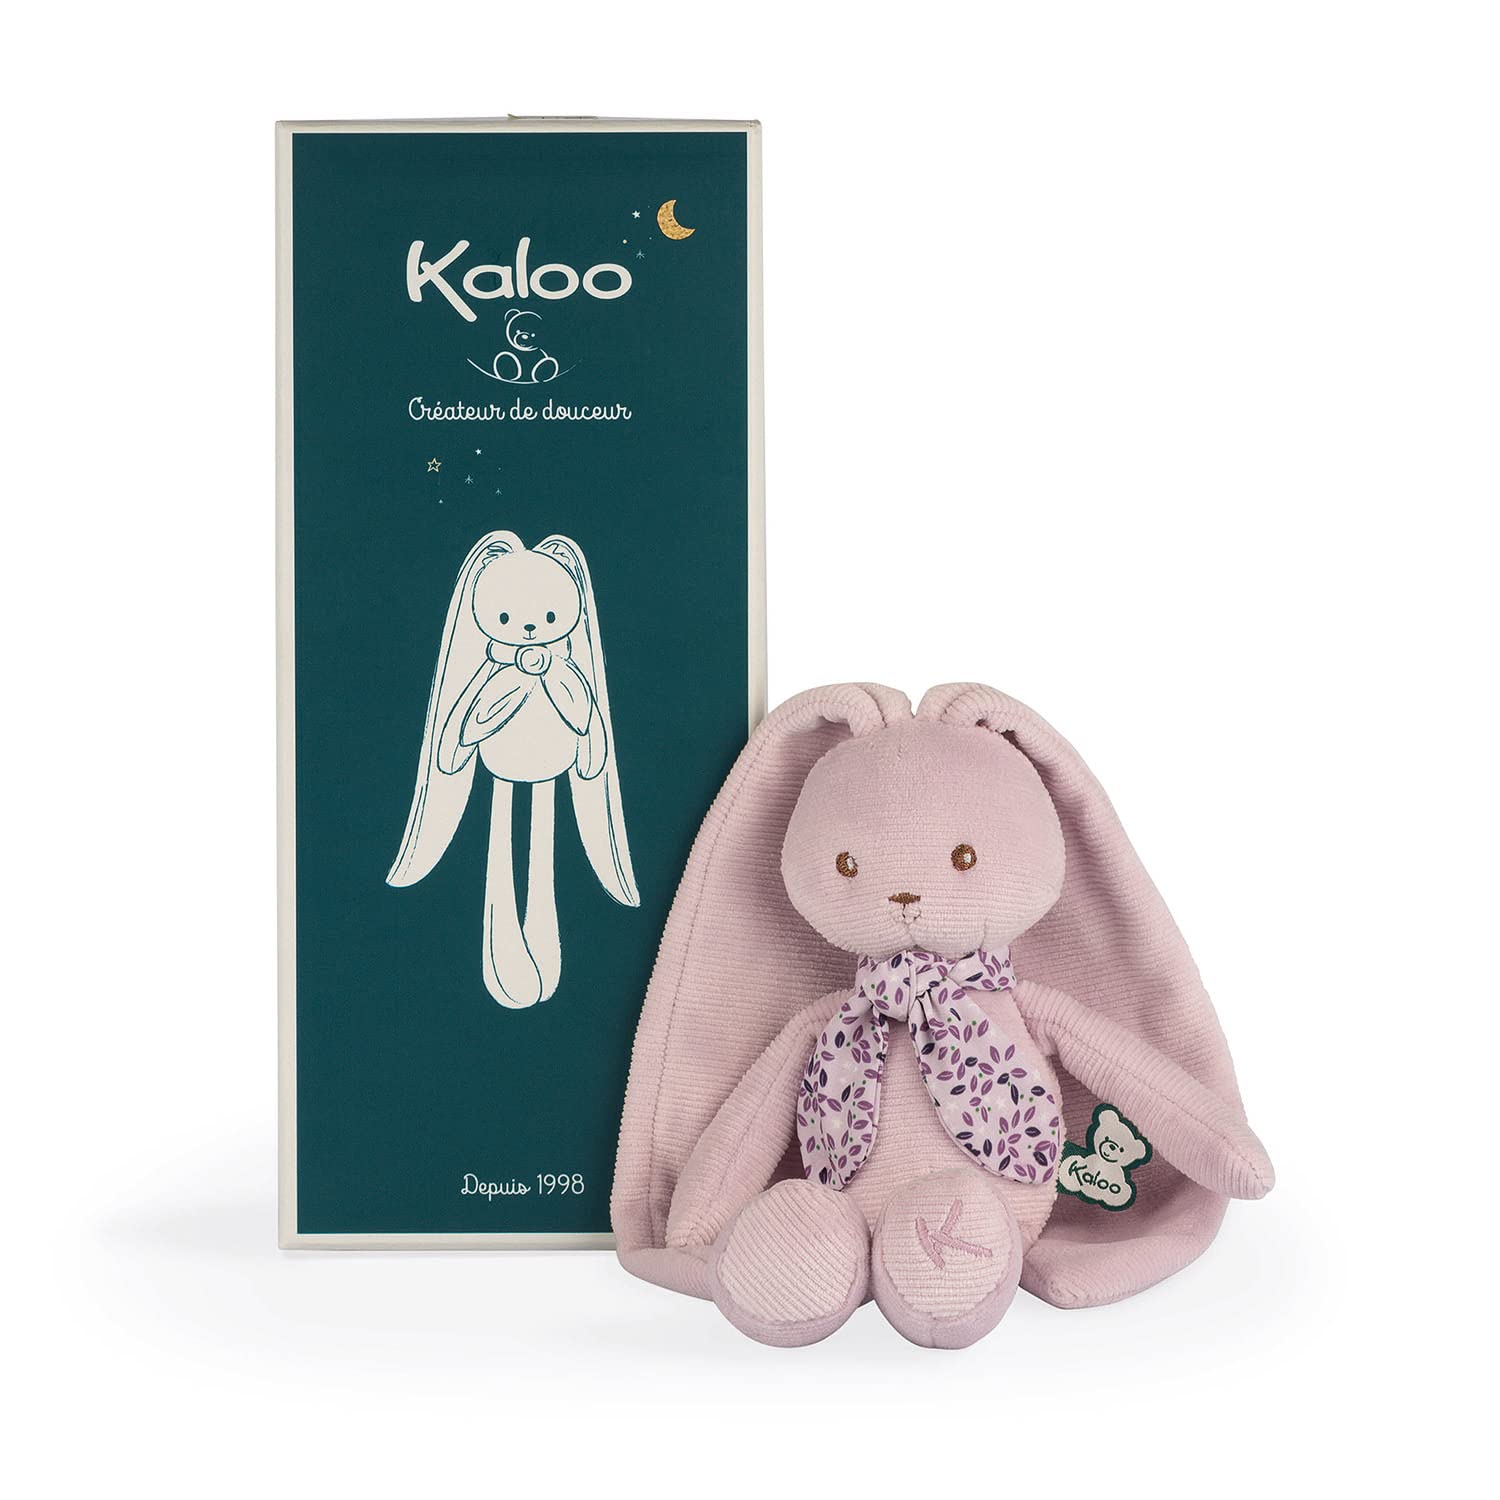 Kaloo Lapinoo My First Friend Corduroy Rabbit - Machine Washable - 10? Tall in Gift Box - Pink Ages 0+ - K969940